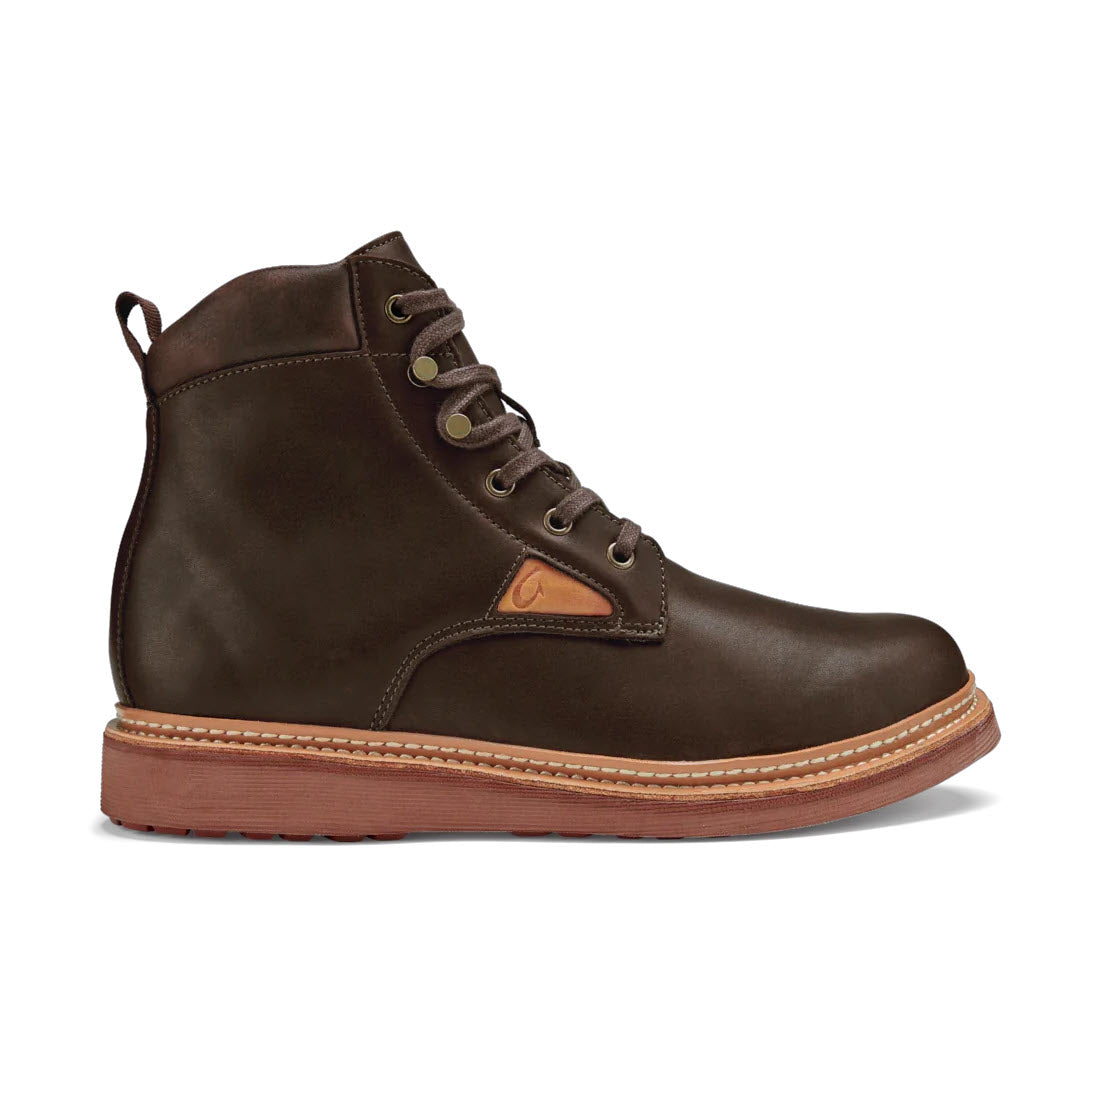 A single Olukai Kilakila Lace Boot Dark Wood - Mens with a rubber sole and lace-up front, isolated on a white background.